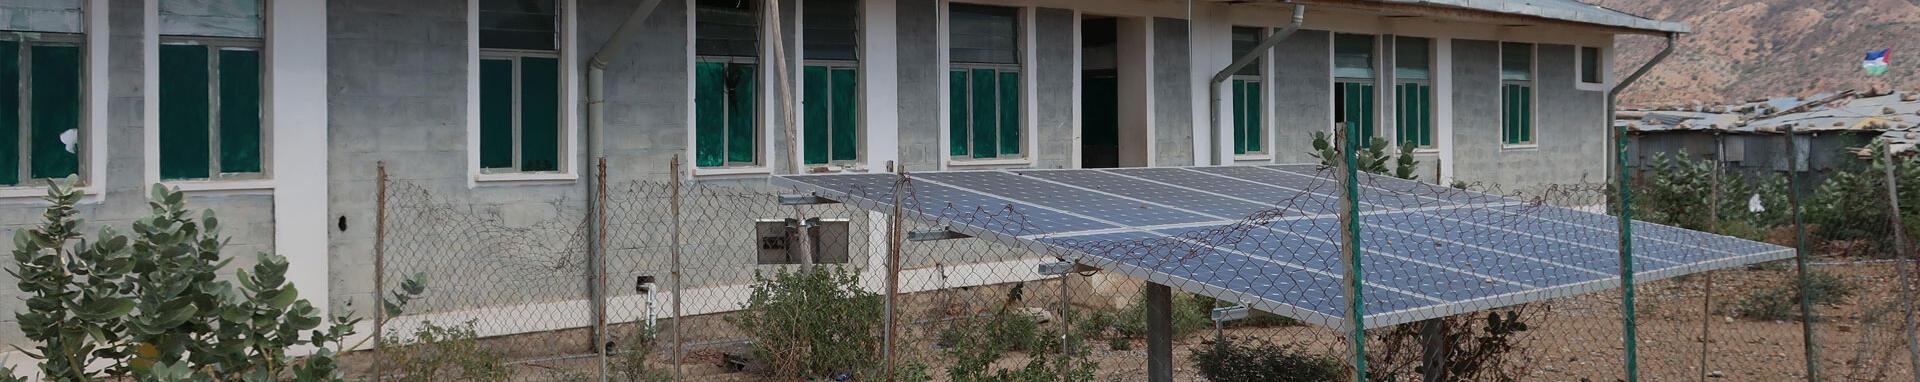 Health clinic operating on solar power, sustainable development for health